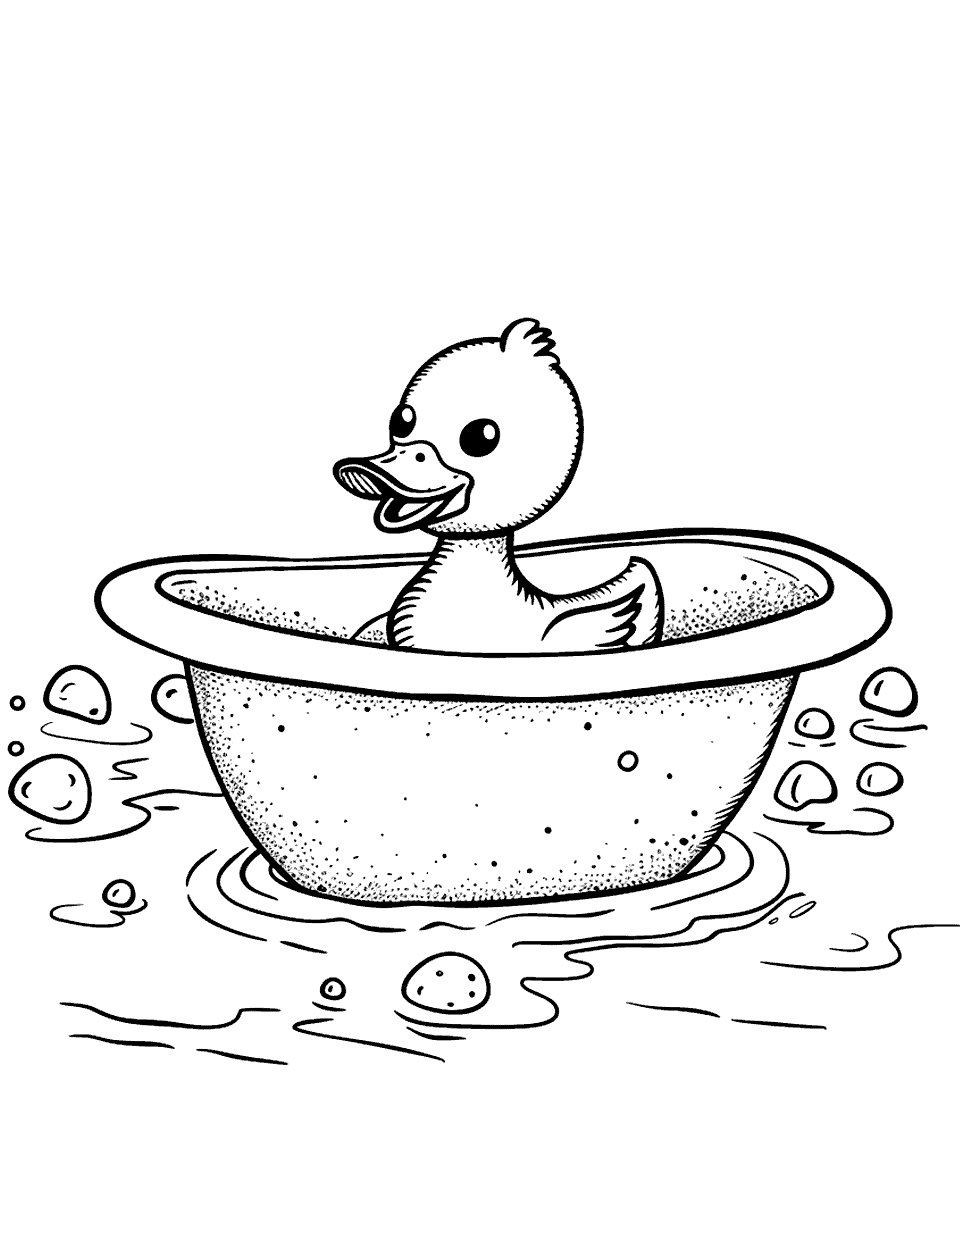 Rubber Duck Floating in a Bathtub Coloring Page - A classic yellow rubber duck happily floating in a bubbly bathtub.